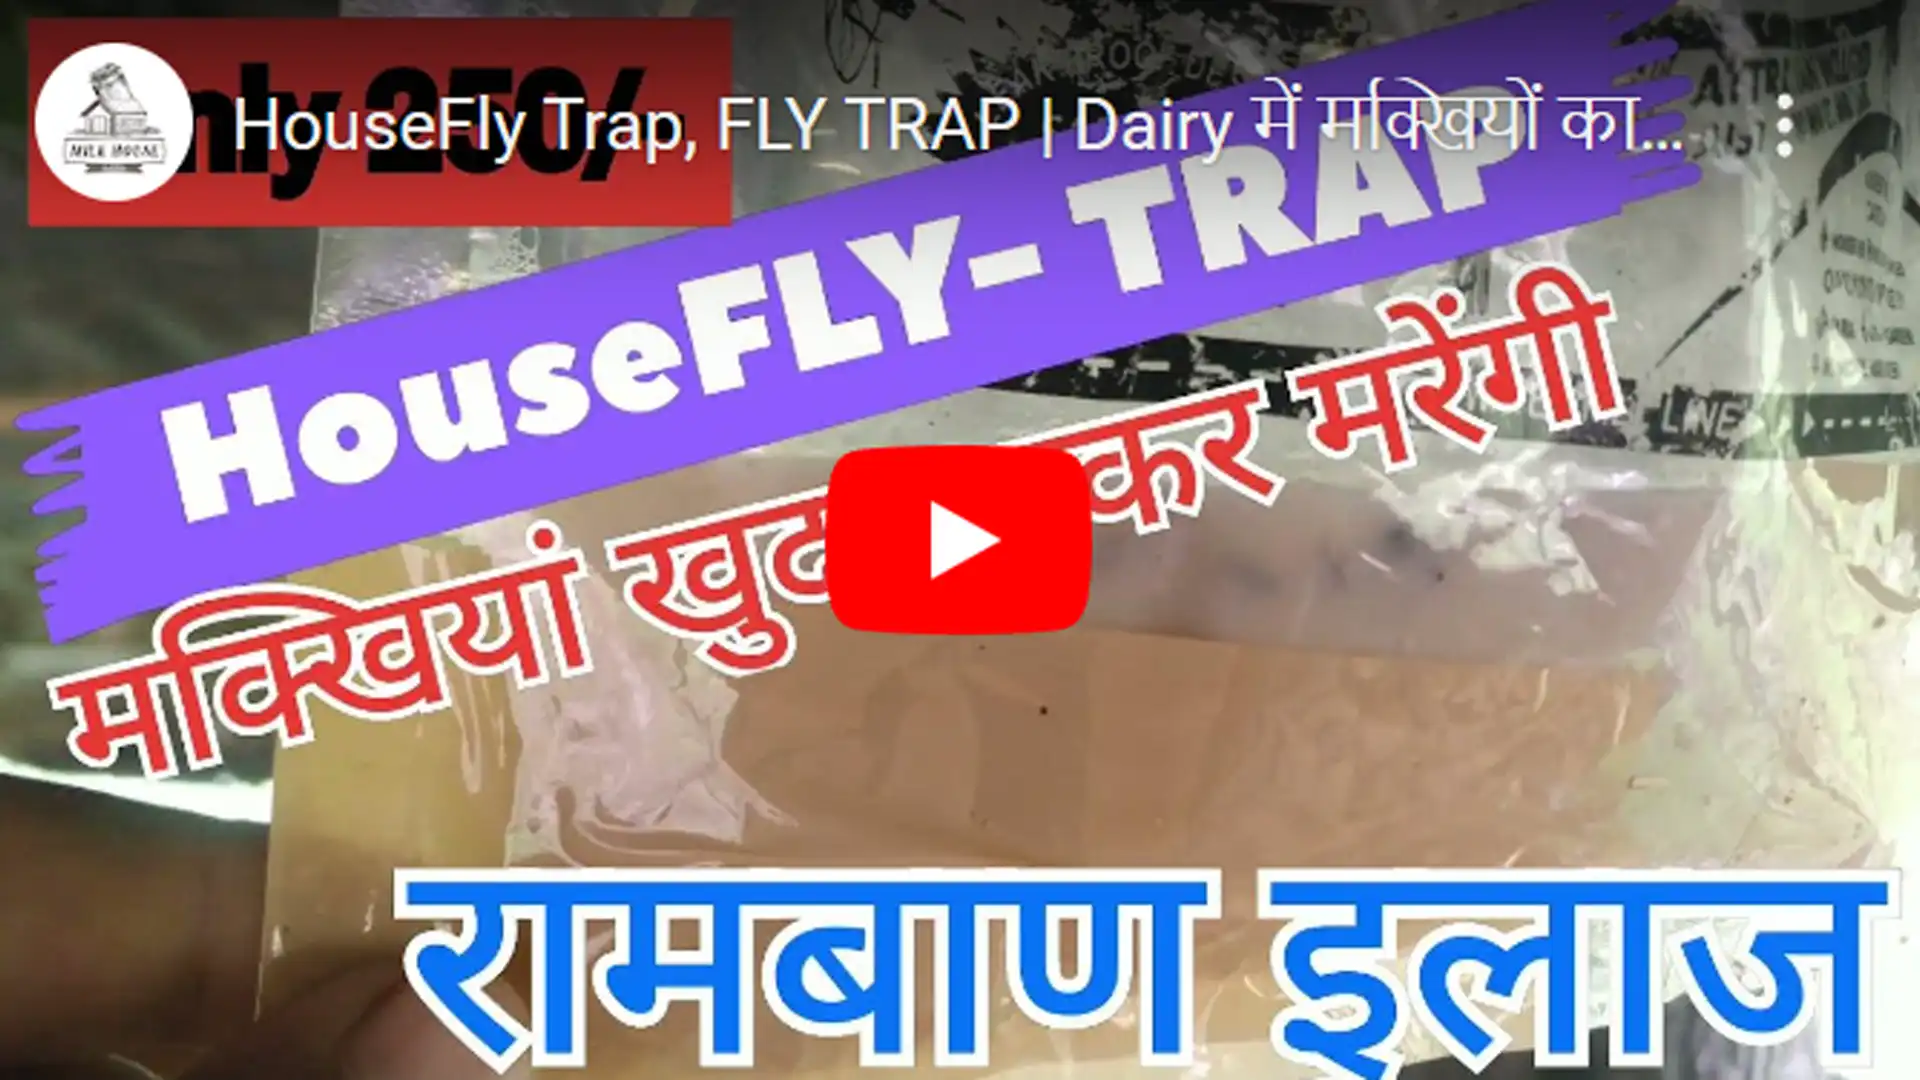 HouseFly Trap Fly trap Review